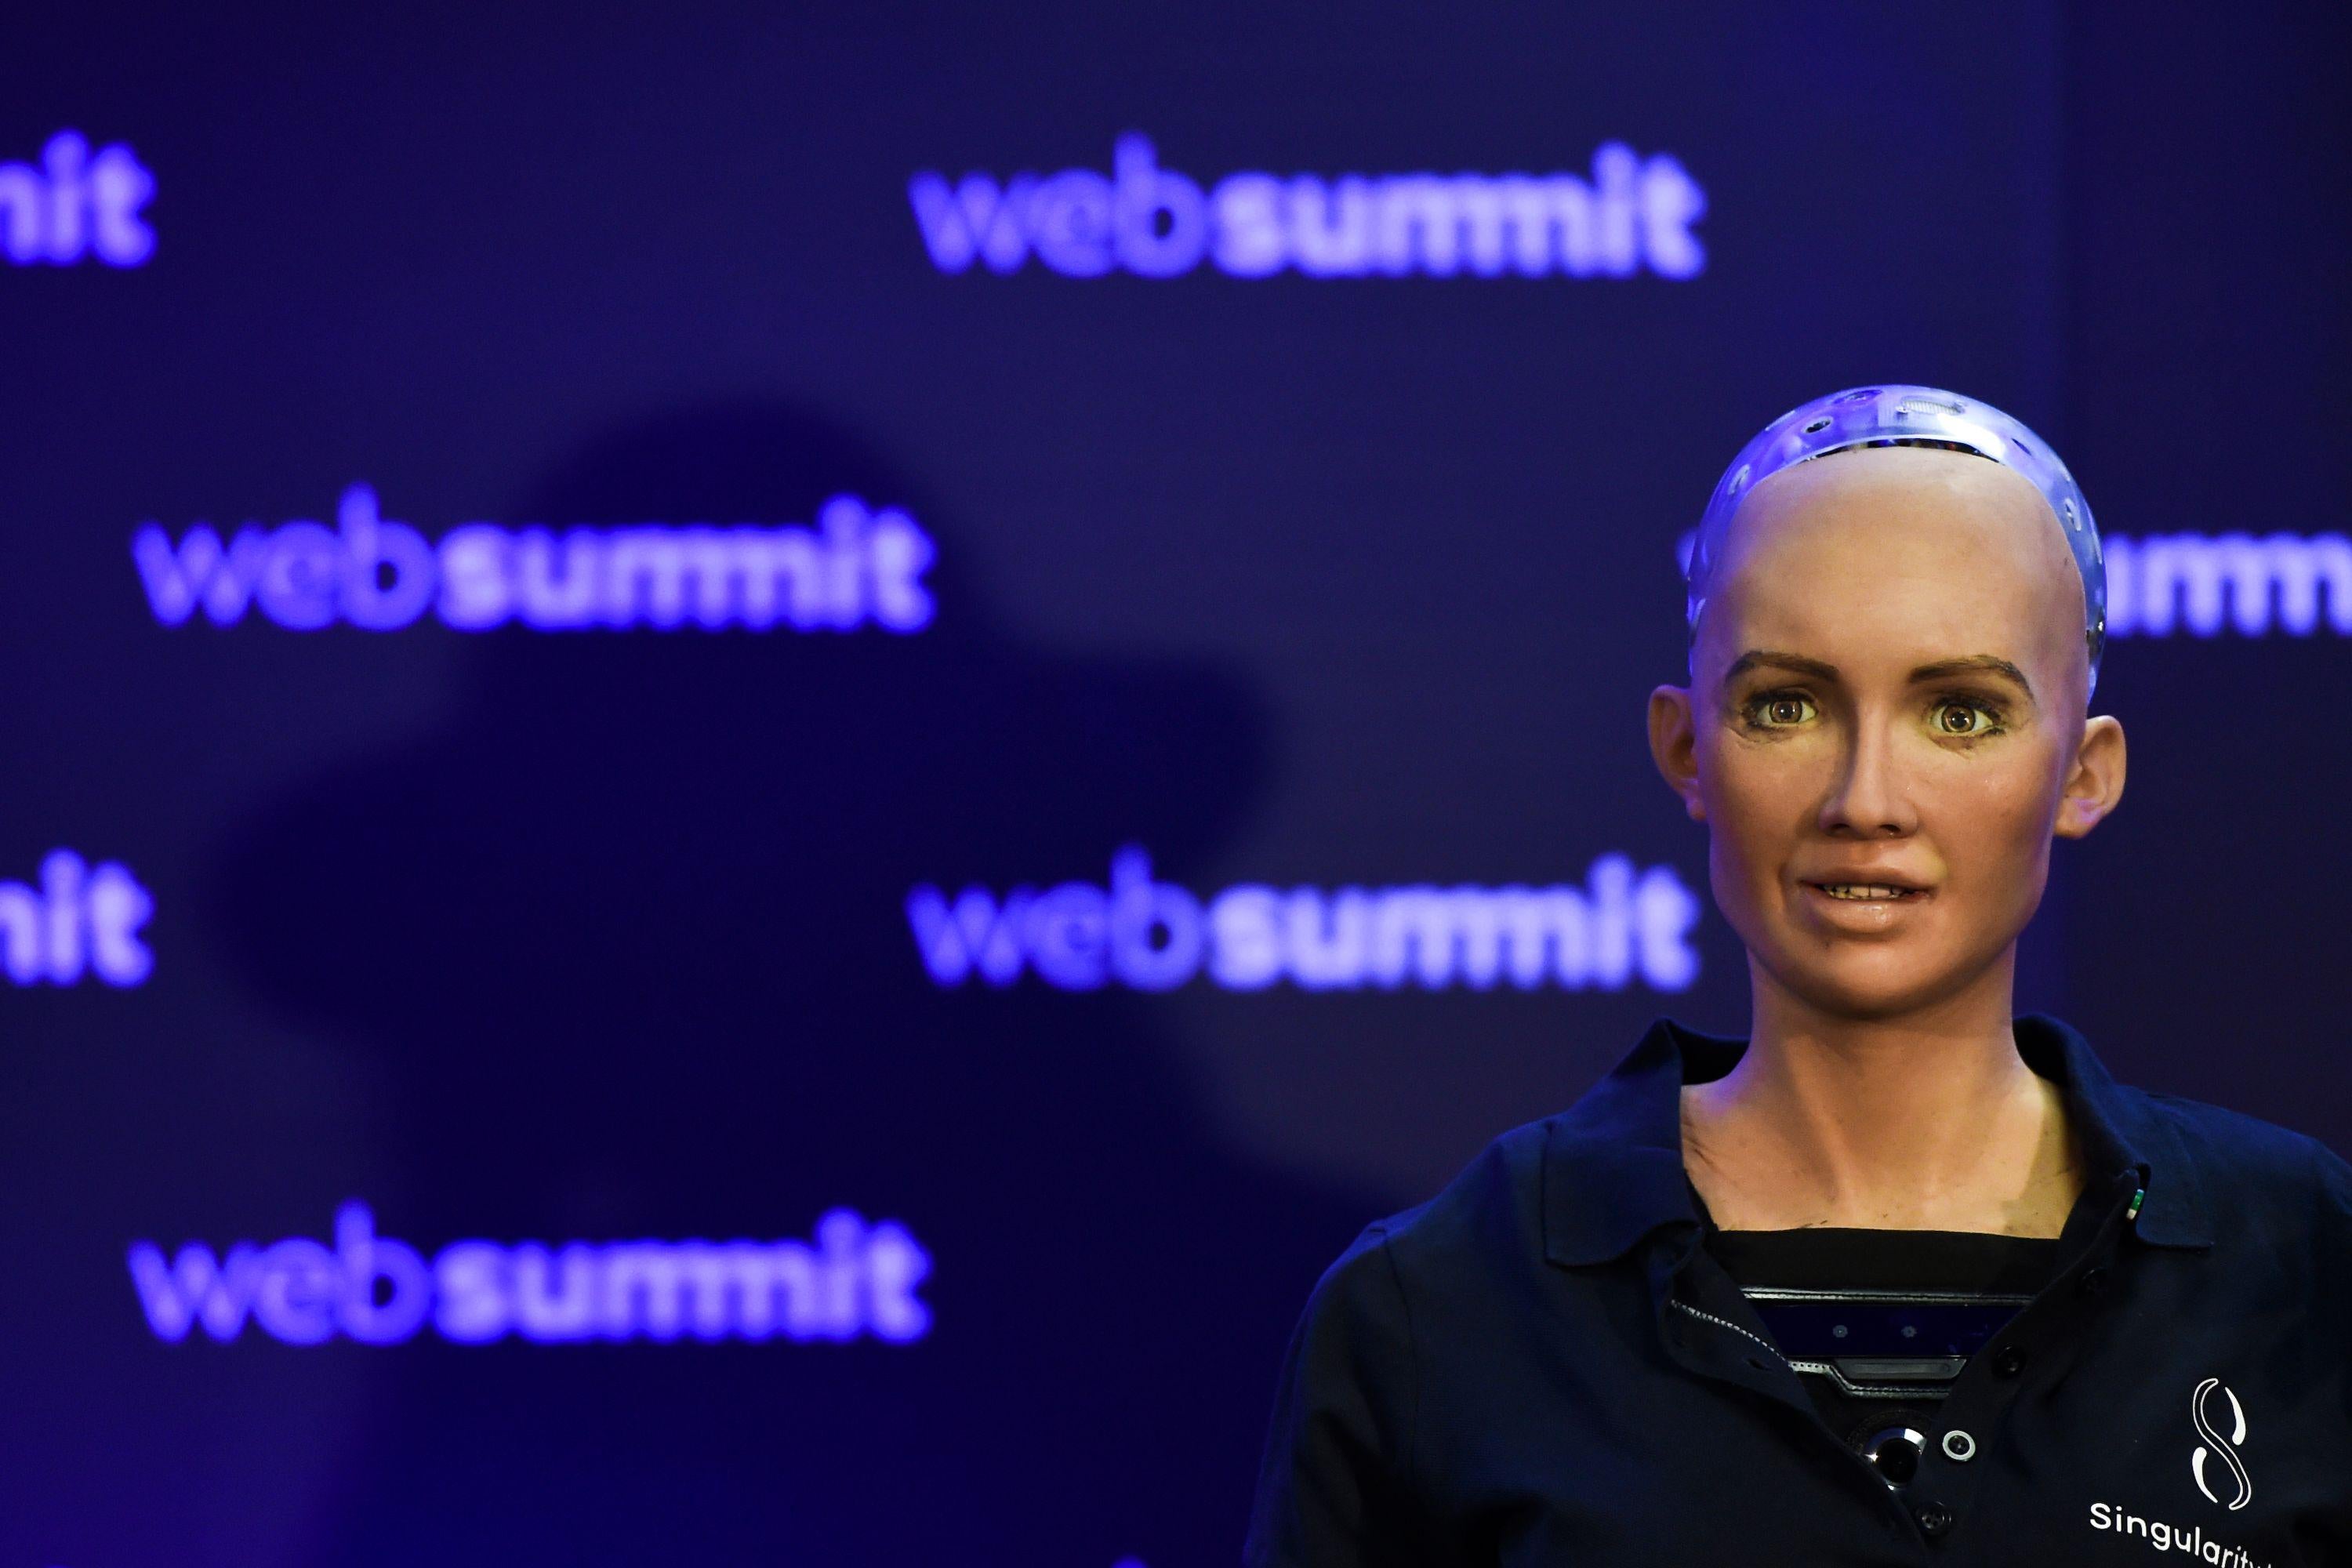 Humanoid 'Sophia The Robot' of Hanson Robotics answers questions during a press conference at the 2017 Web Summit in Lisbon on November 7, 2017. 
Europe's largest tech event Web Summit is held at Parque das Nacoes in Lisbon from November 6 to November 9.  / AFP PHOTO / PATRICIA DE MELO MOREIRA        (Photo credit should read PATRICIA DE MELO MOREIRA/AFP/Getty Images)